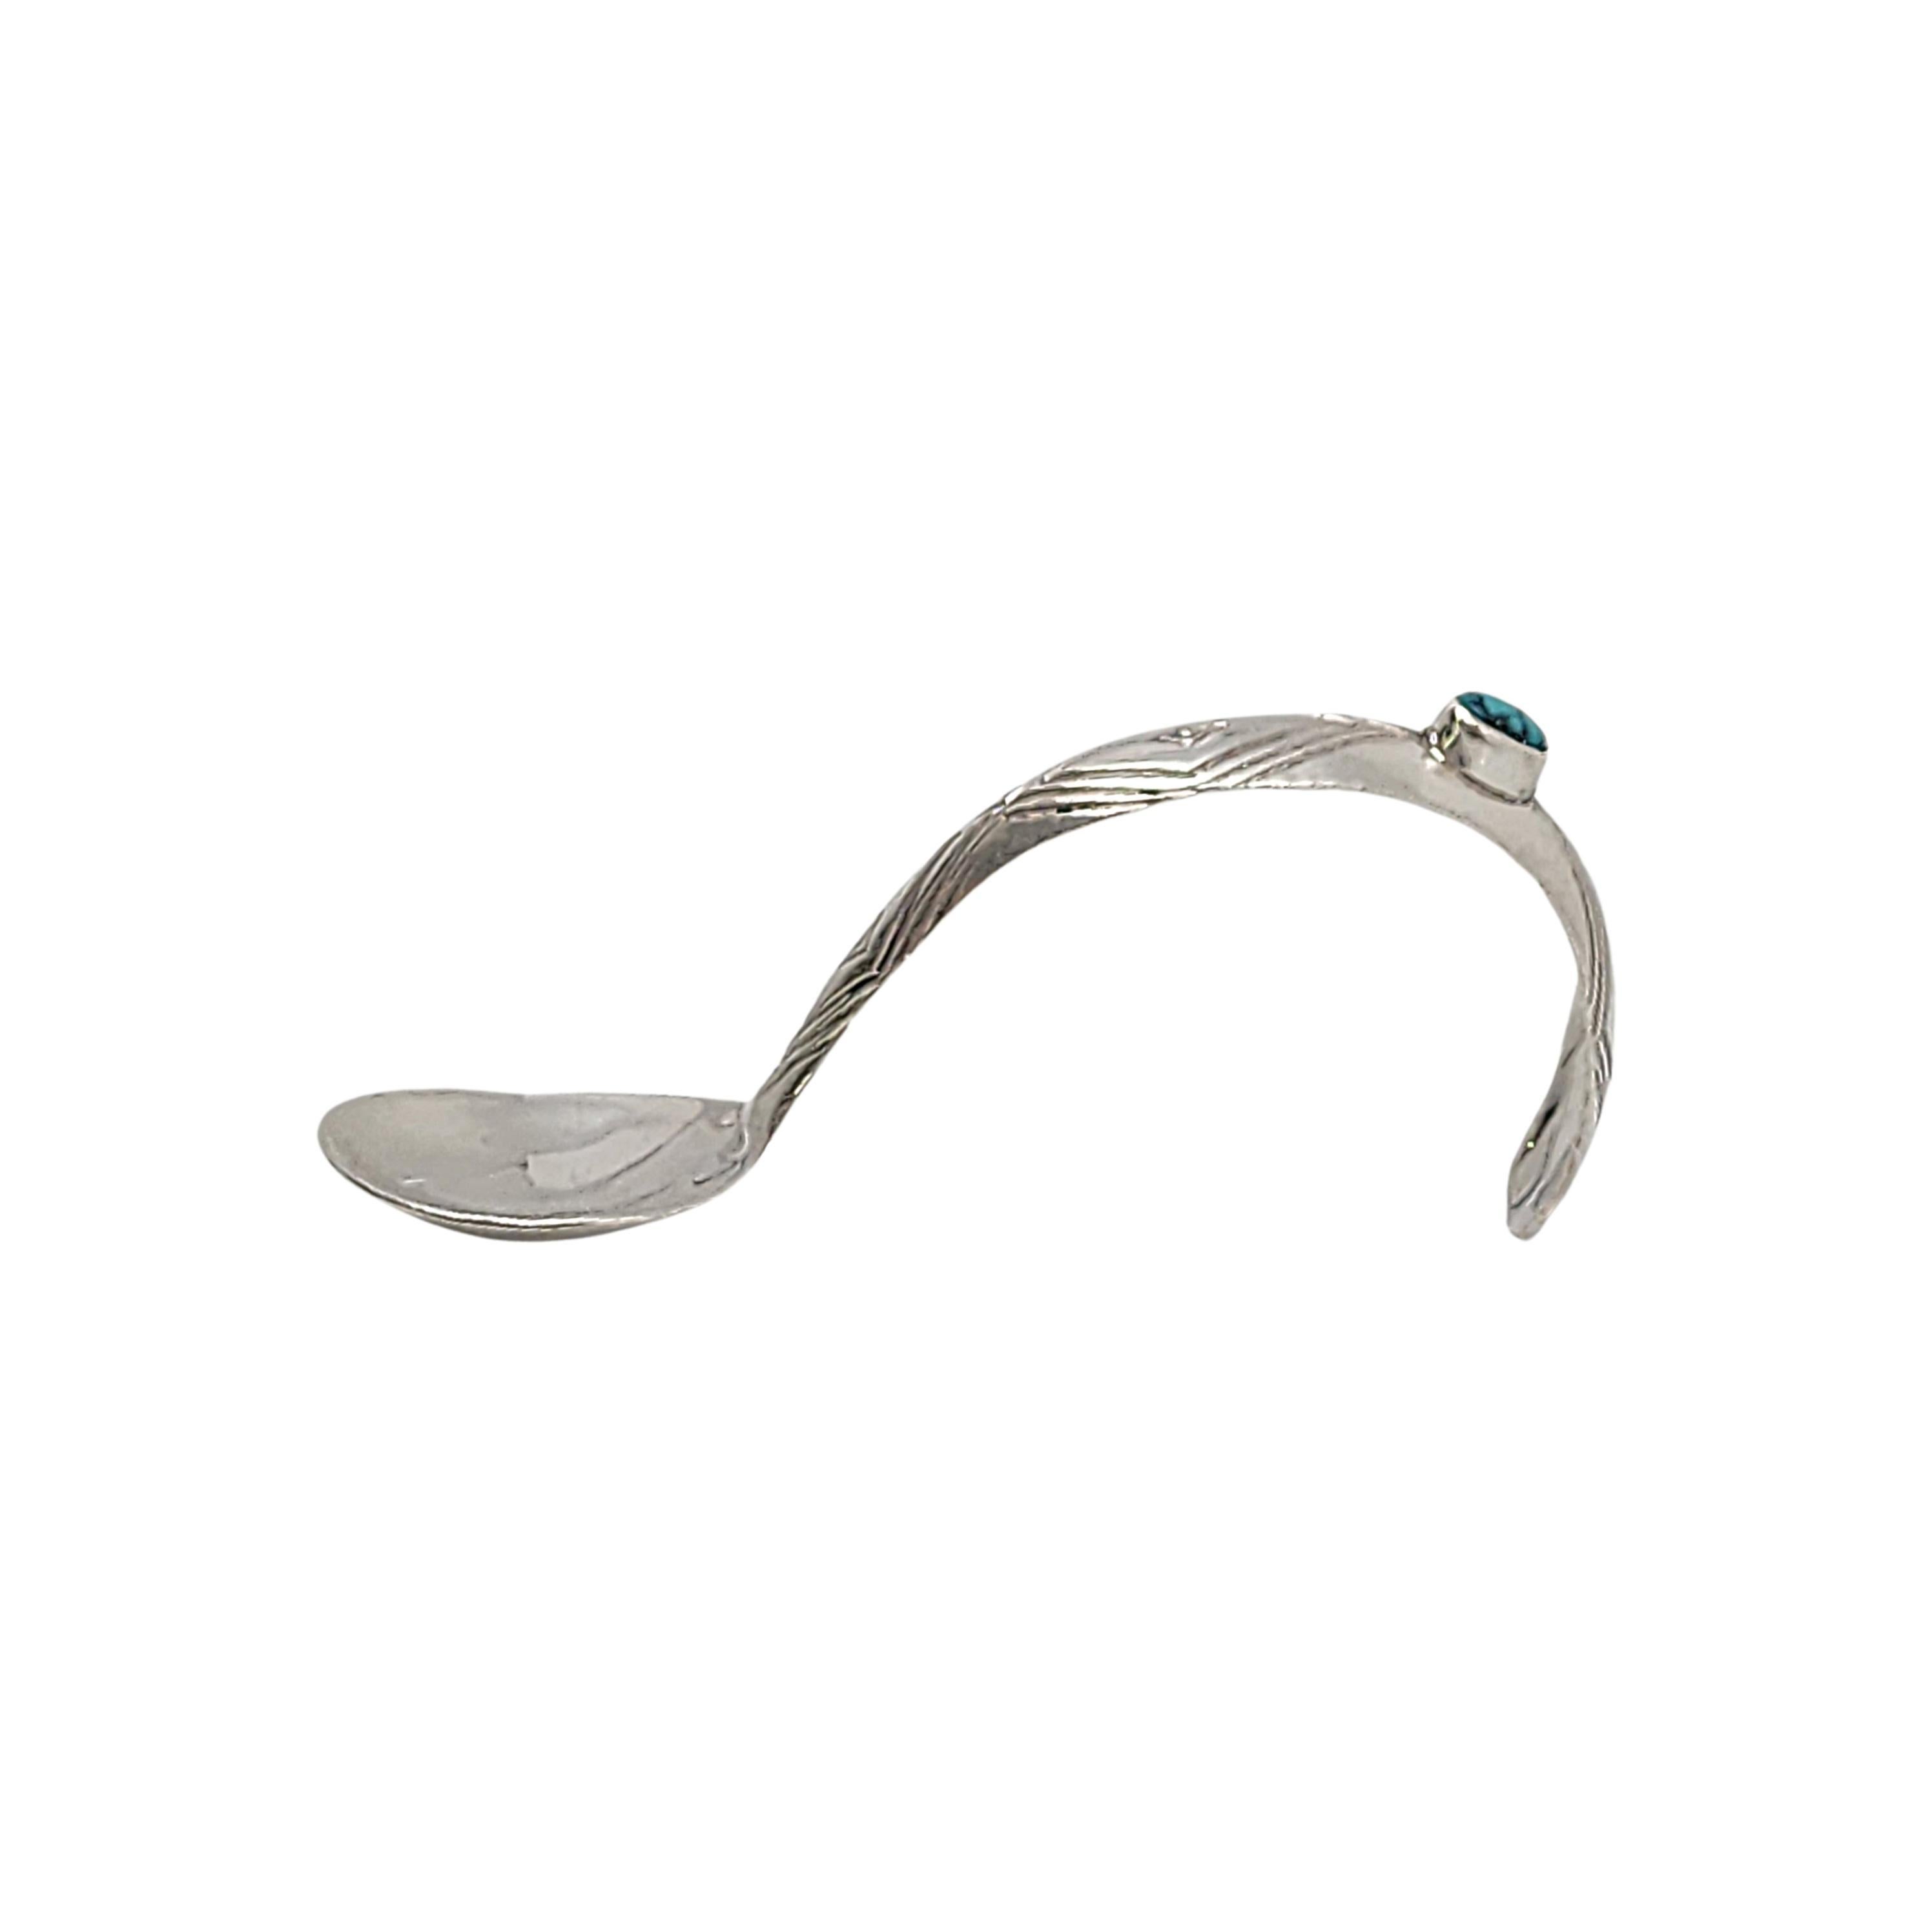 Sterling silver and turquoise baby spoon by Native American Navajo artisan, Patrick Yellowhorse.

This spoon's arched handle features an oval bezel set turquoise with etched concentric diamond design.

Measures approx 3 1/4